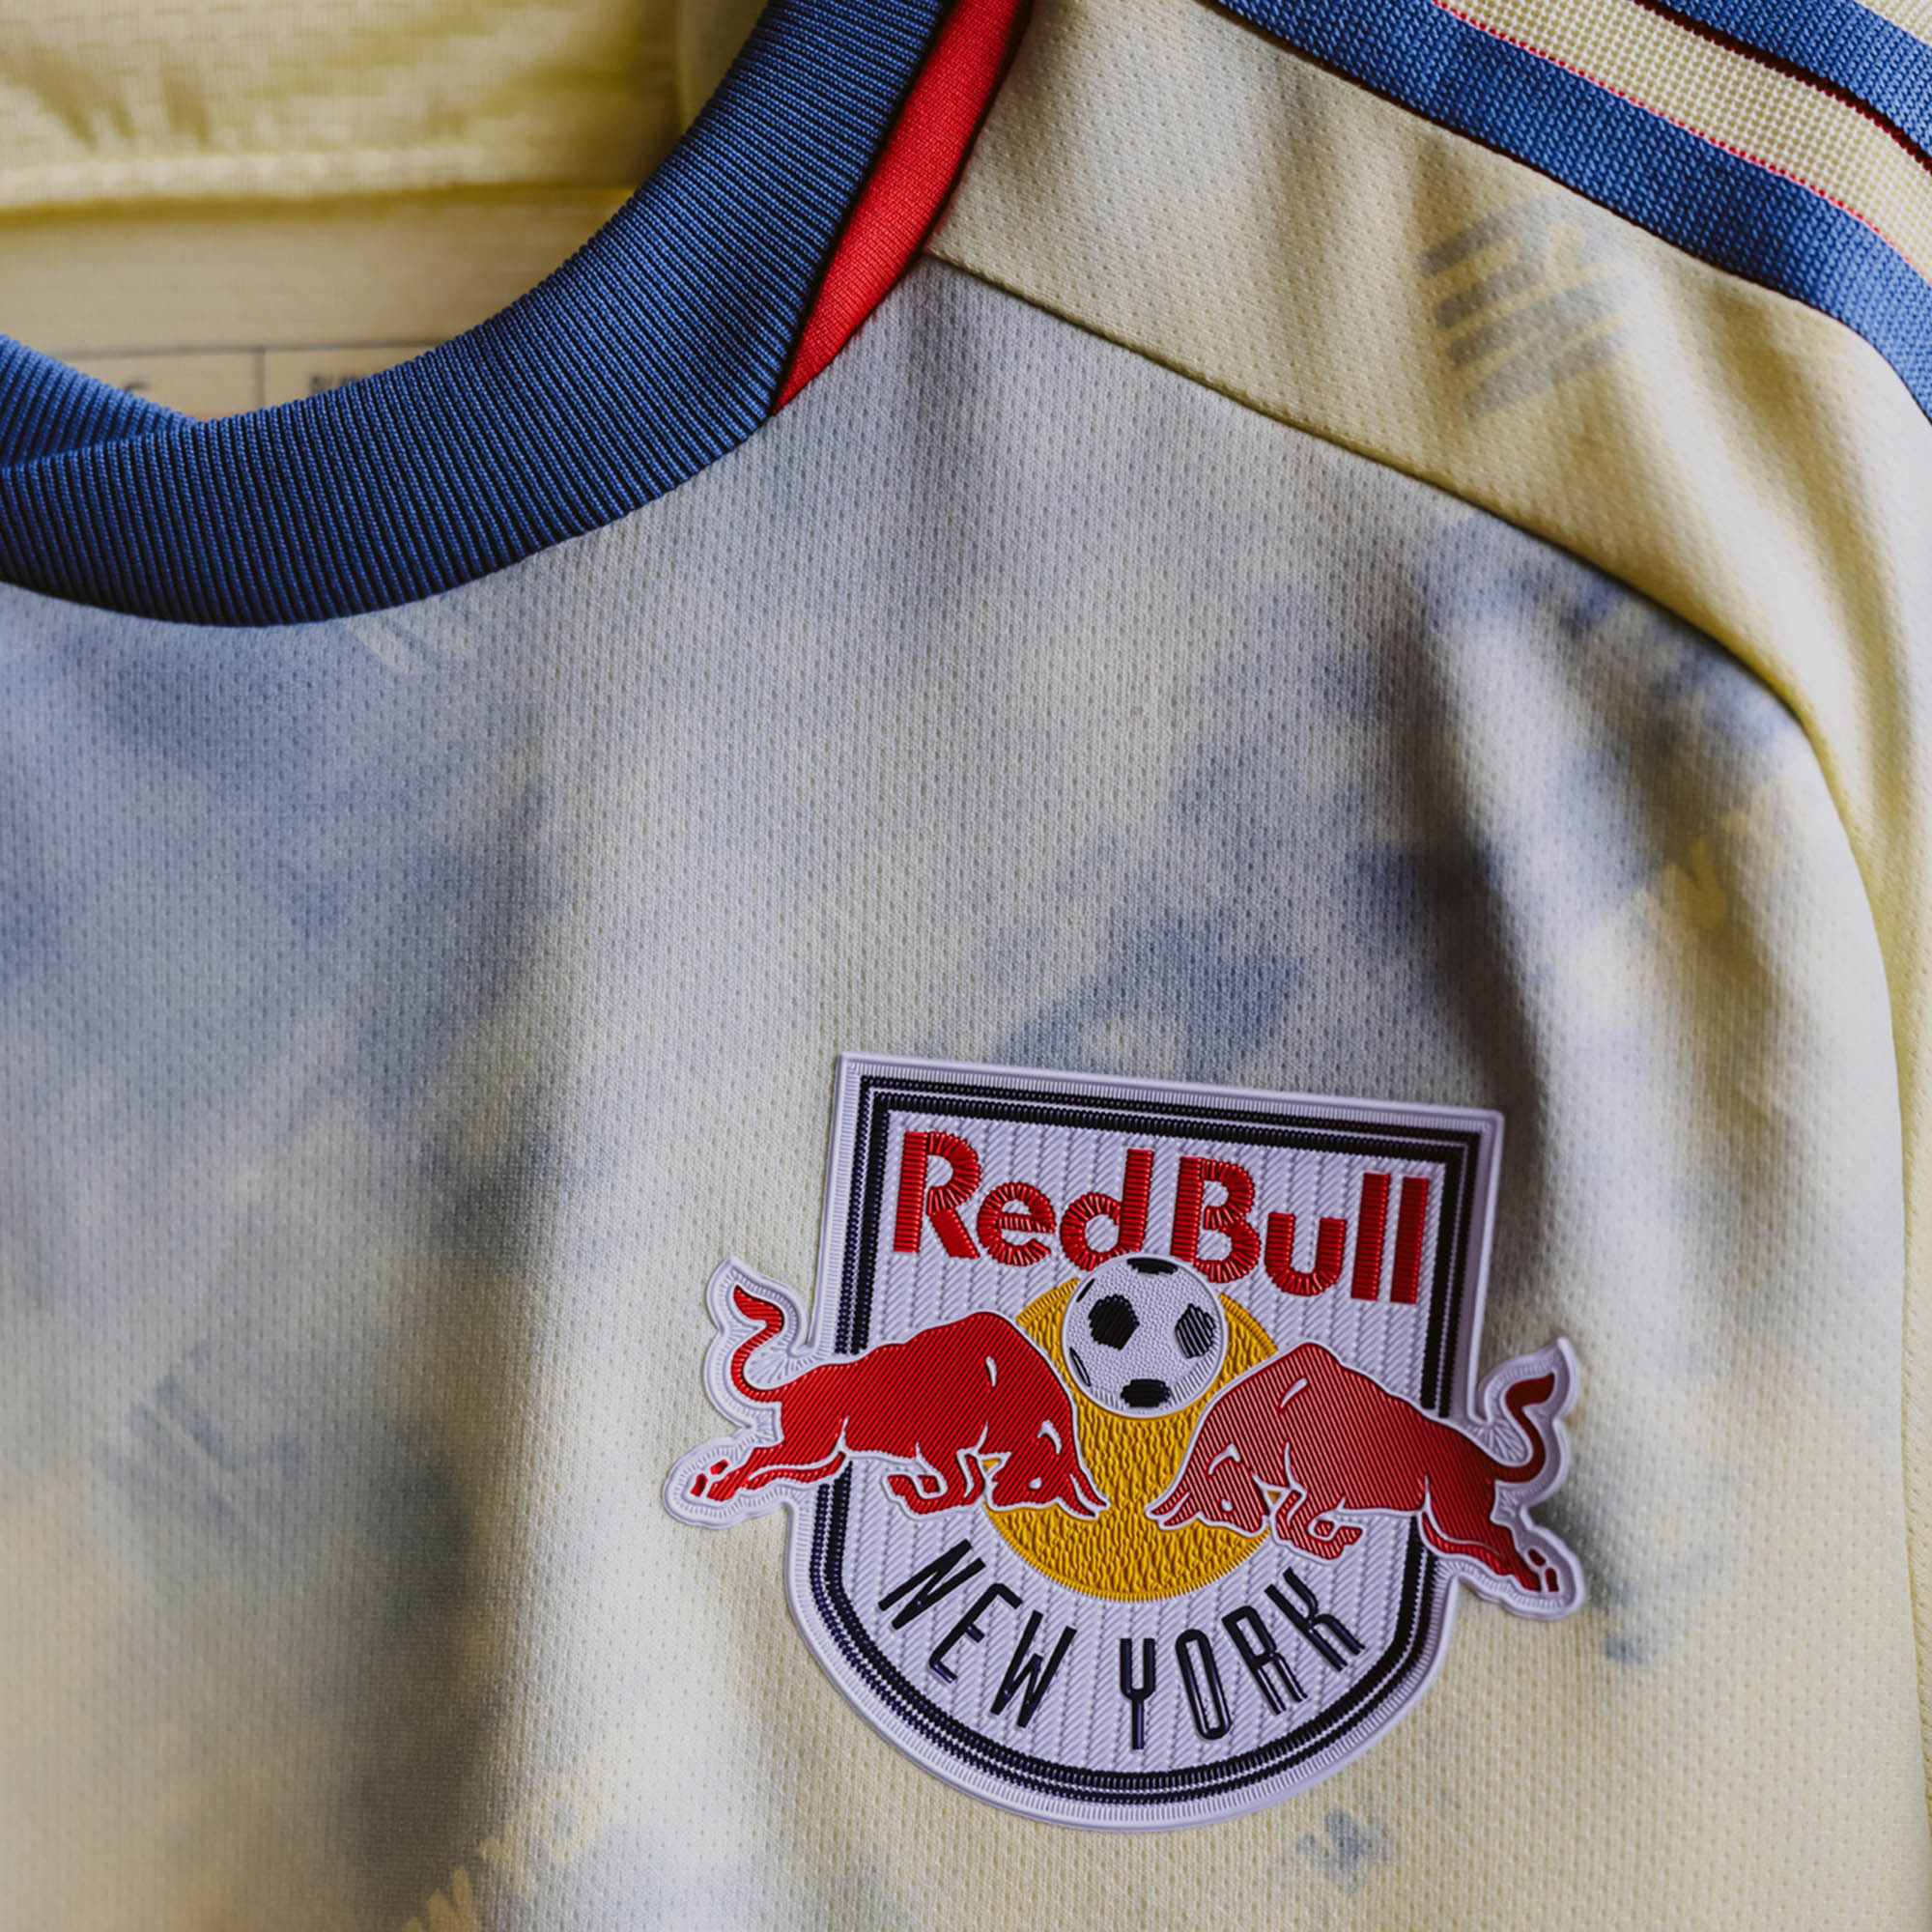 New York Red Bulls now officially represent the name with new uniforms